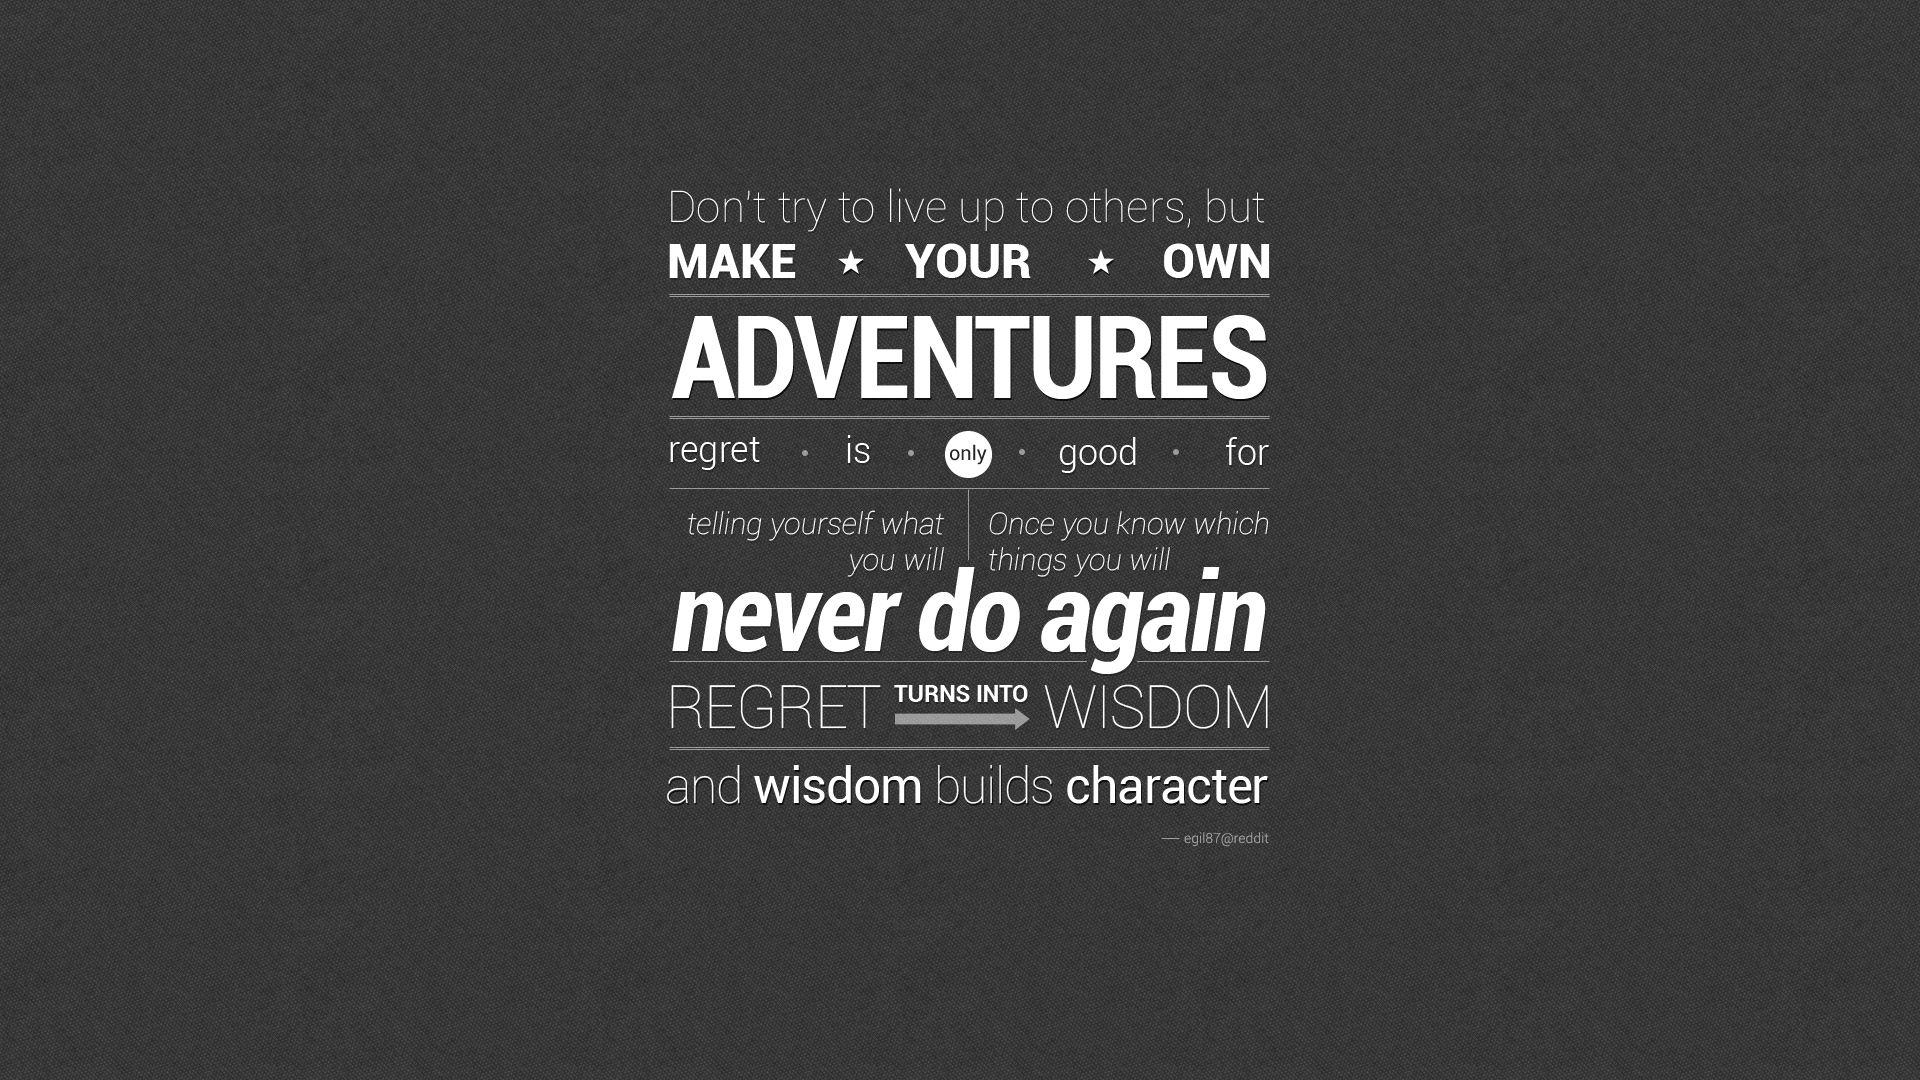 Best Motivational Wallpaper Examples with Inspiring Quotes